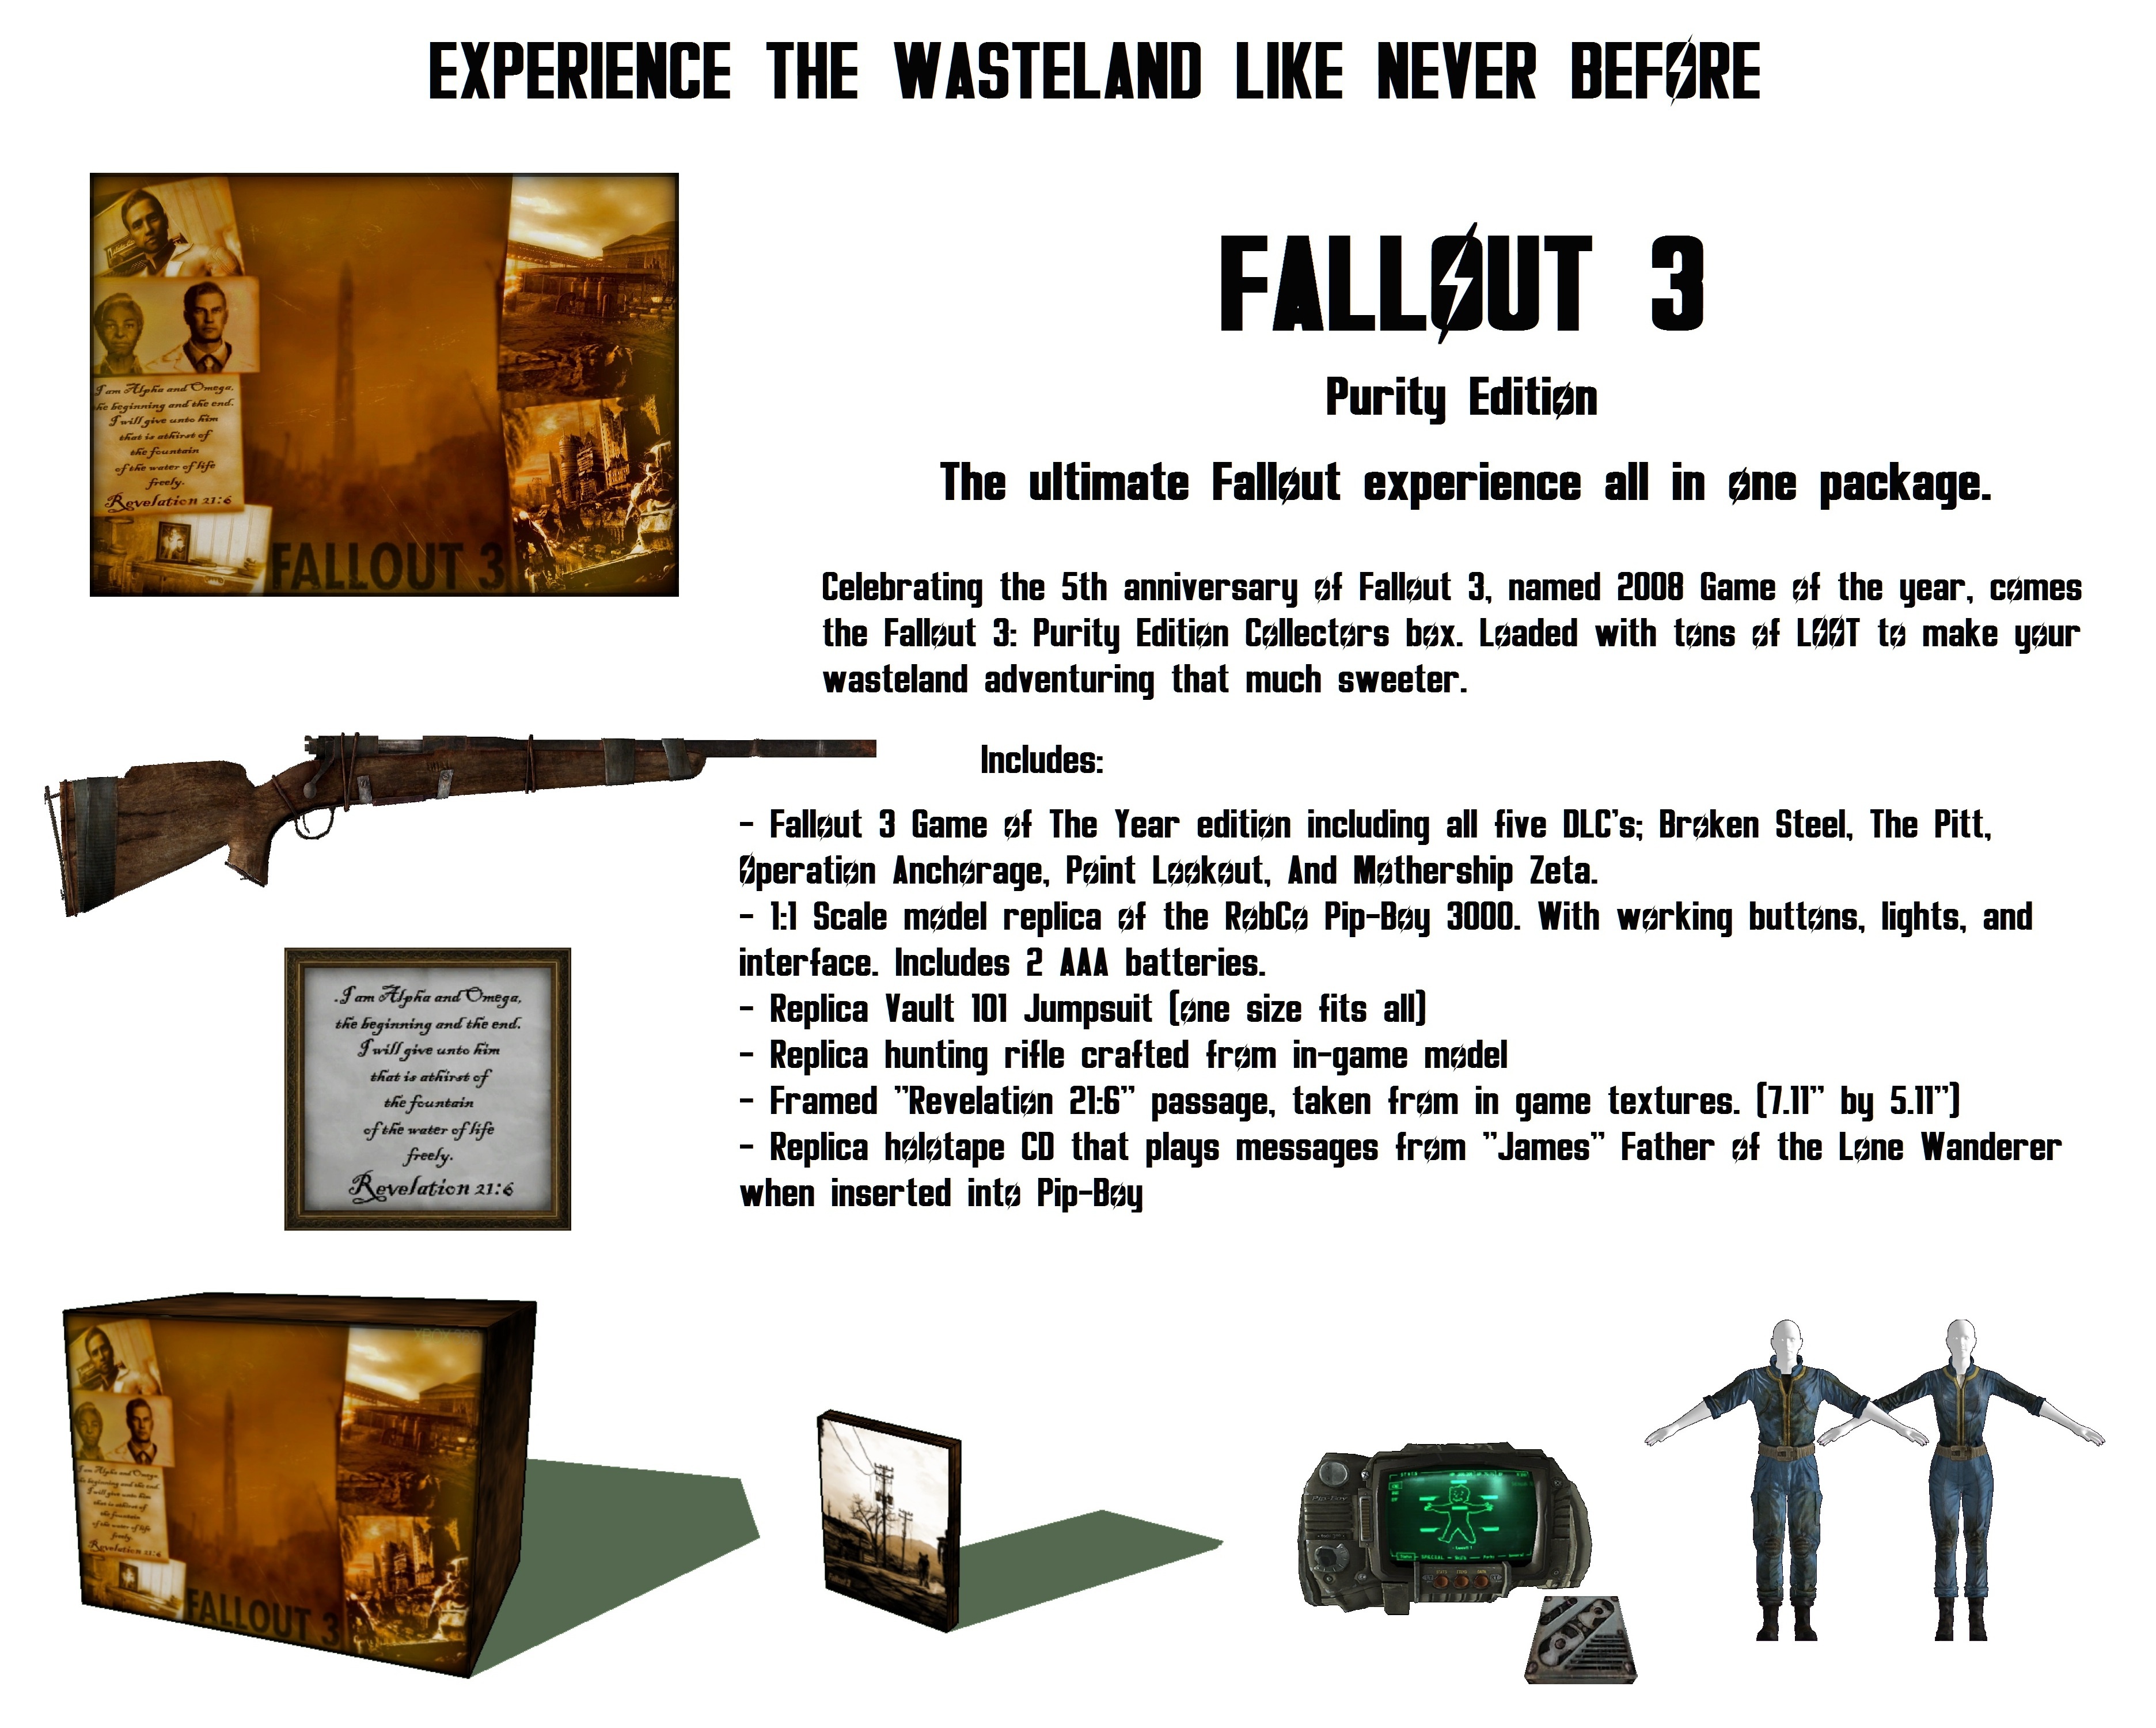 Fallout 3: Purity Edition box cover